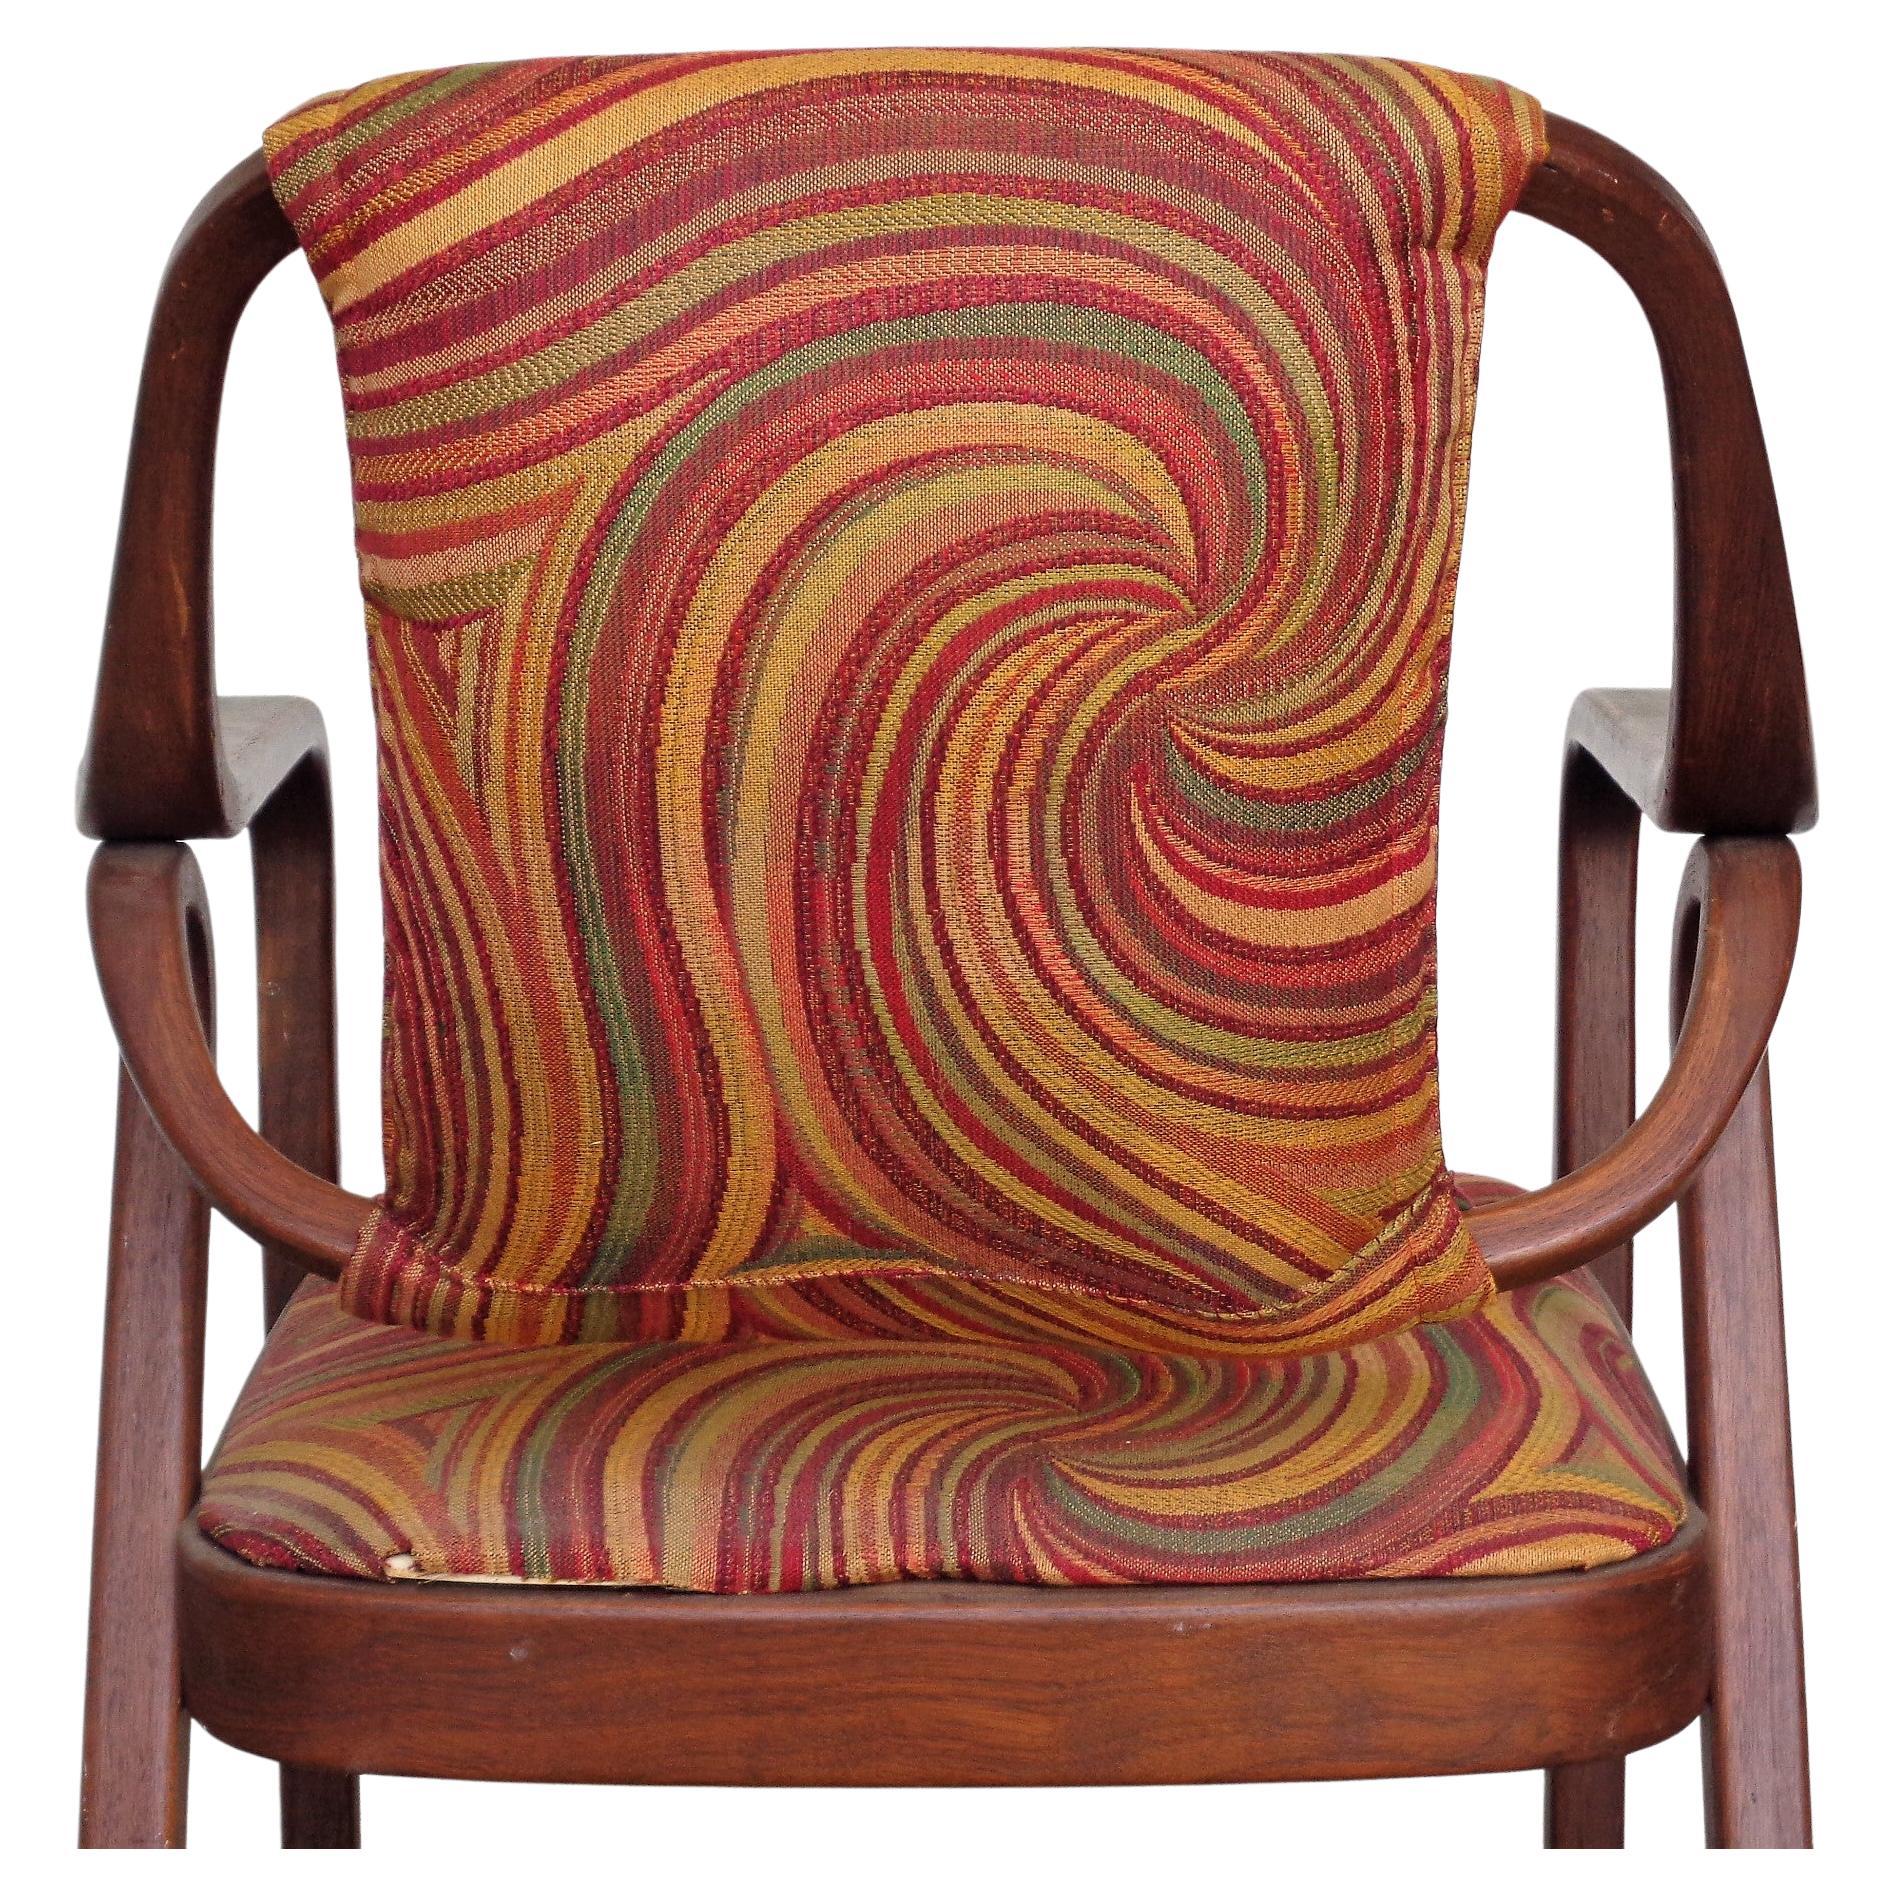 Mid-20th Century Bentwood Walnut Armchair #1105 by Don Pettit for Knoll, 1960's